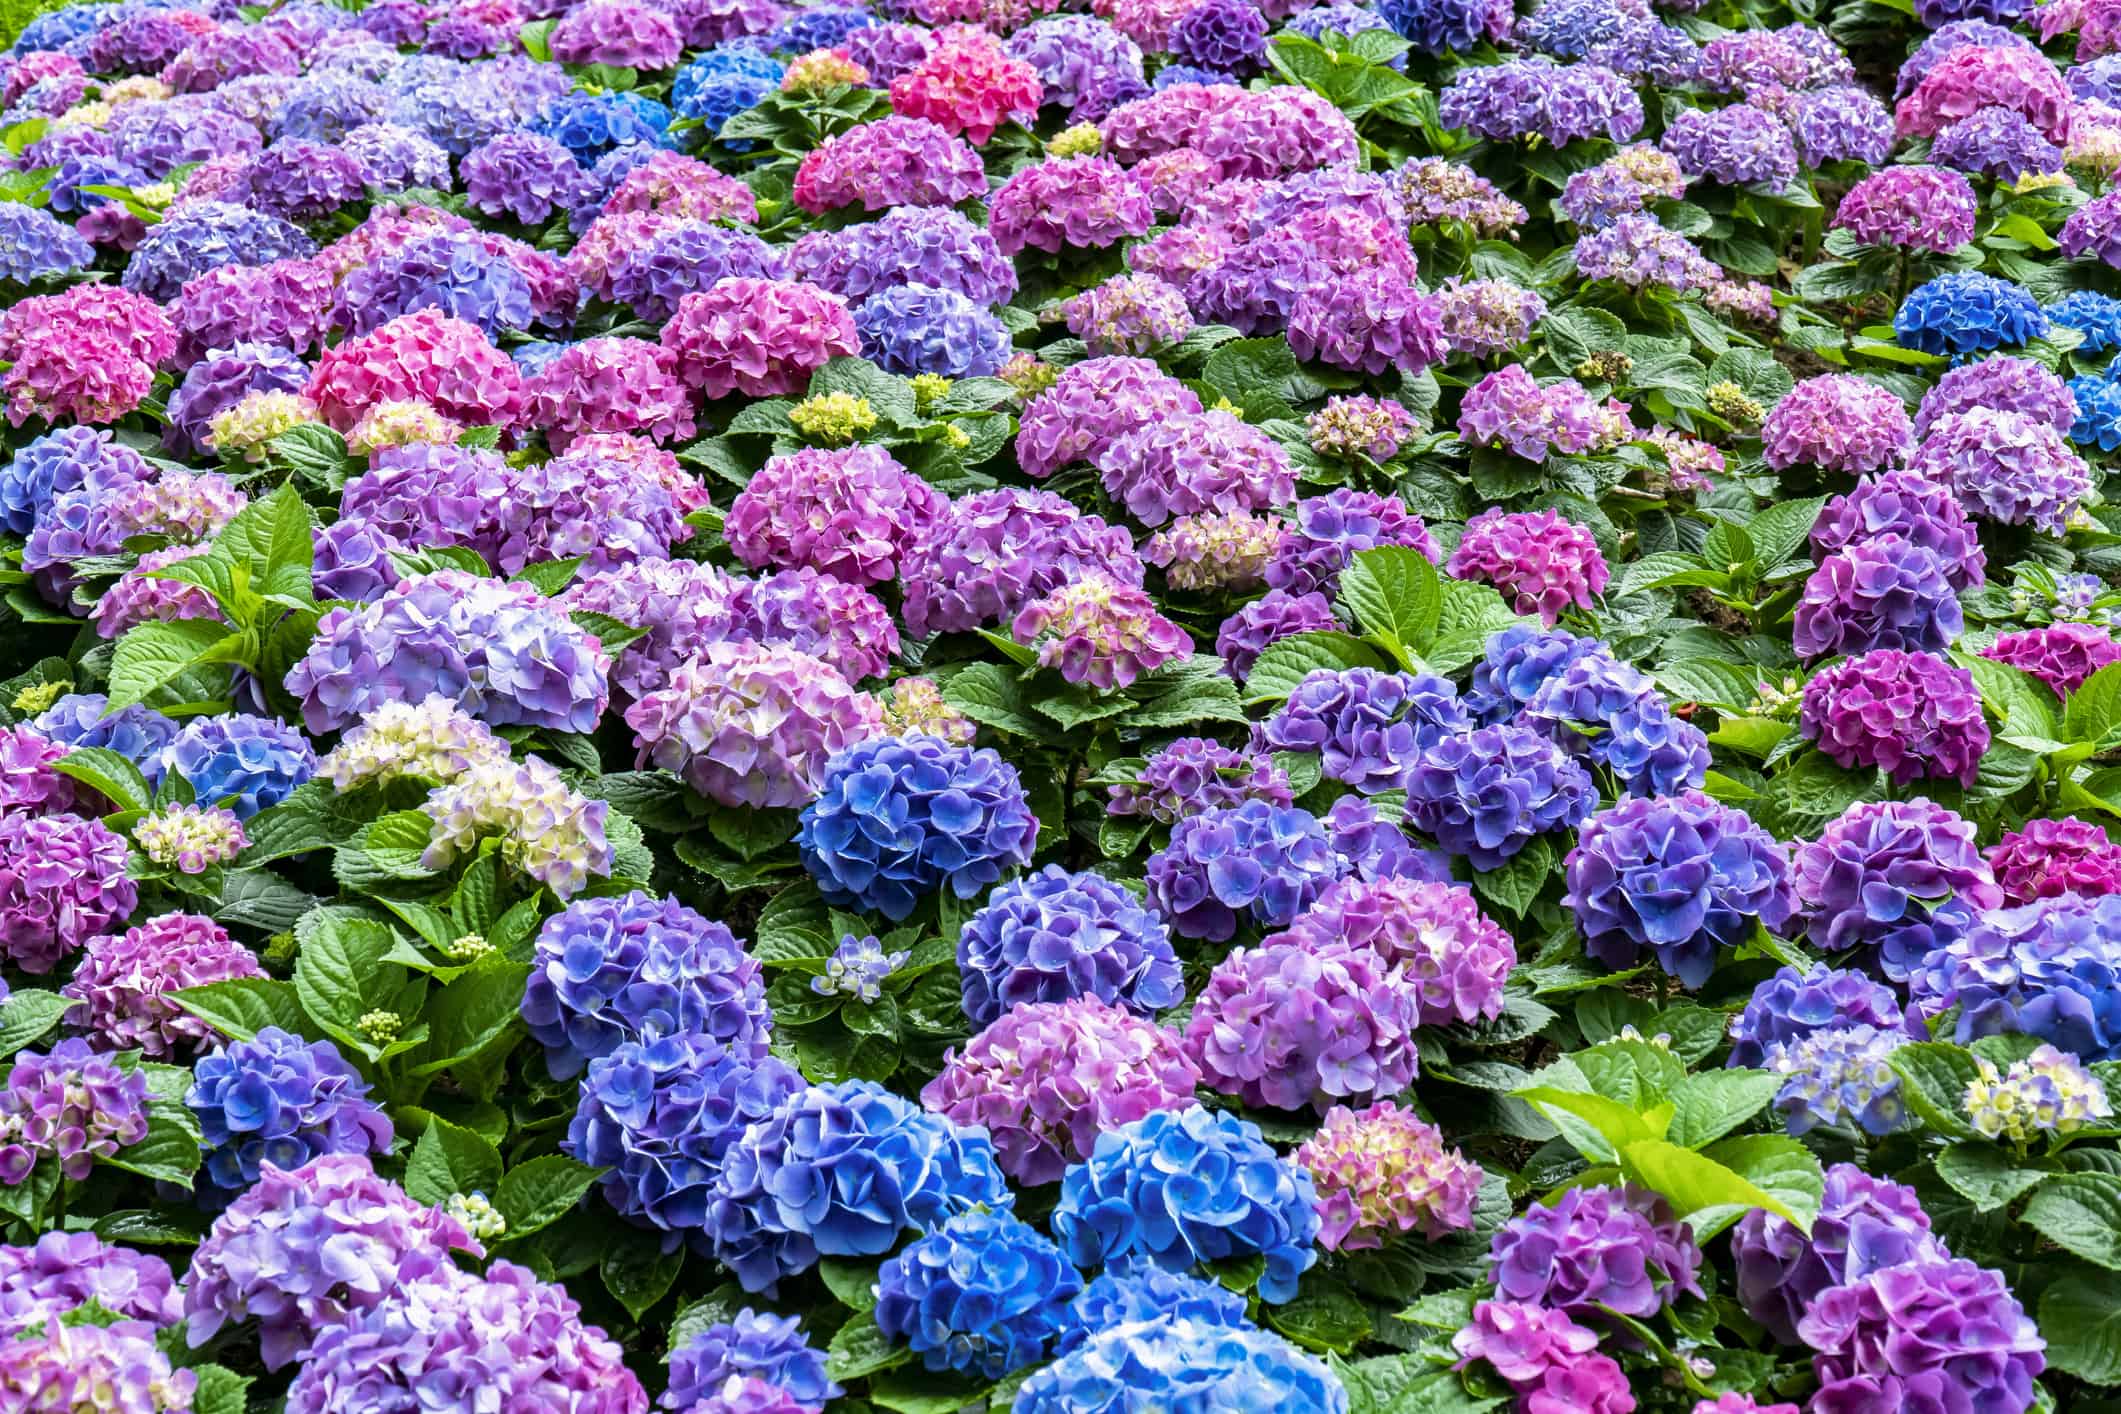 Image of Rhododendrons flowers similar to hydrangeas